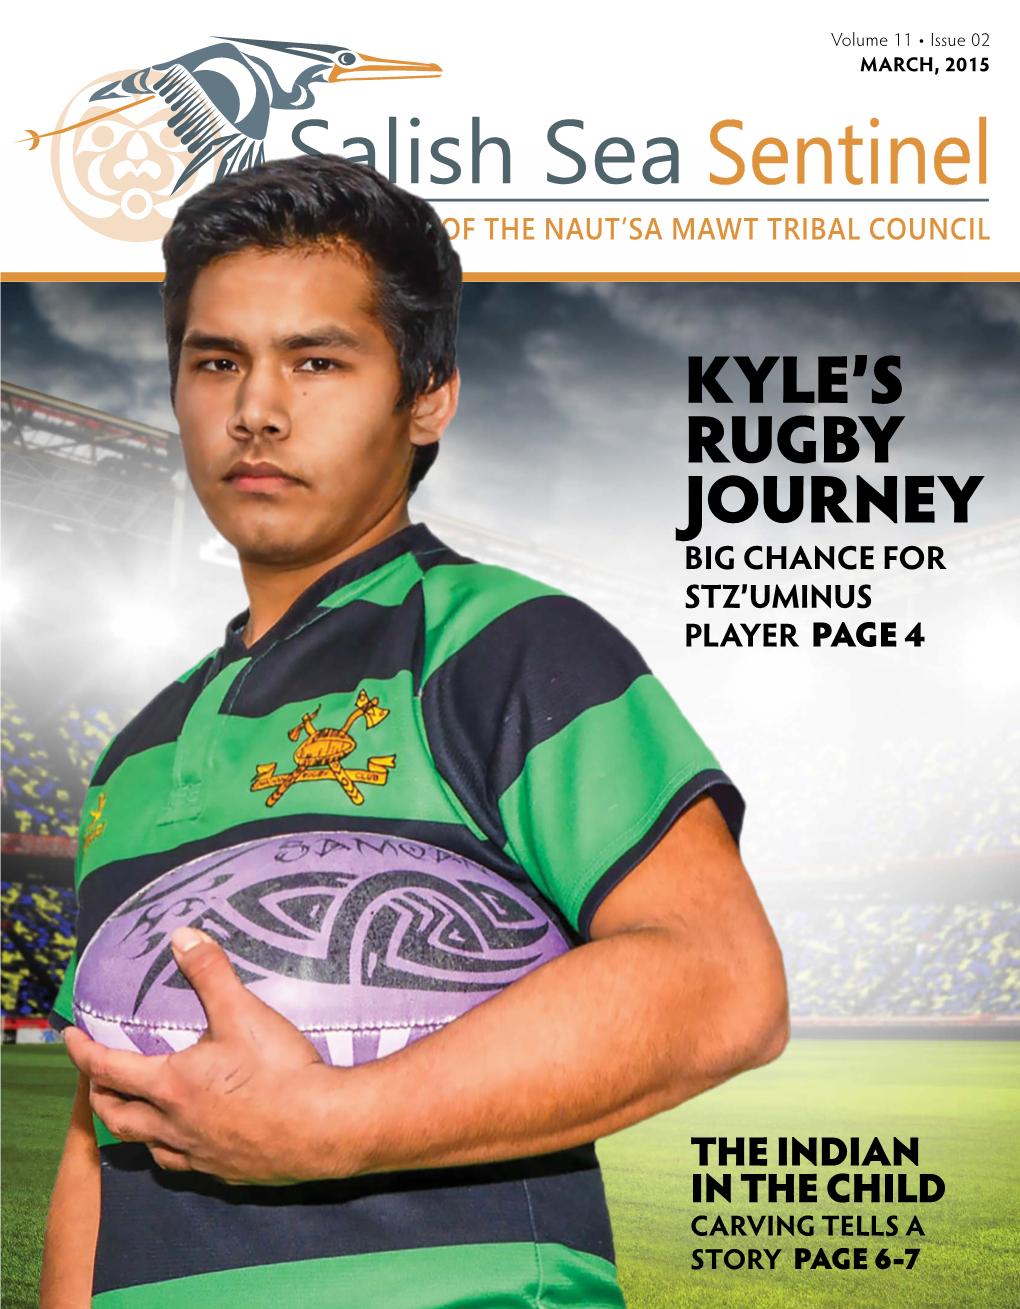 Kyle's Rugby Journey